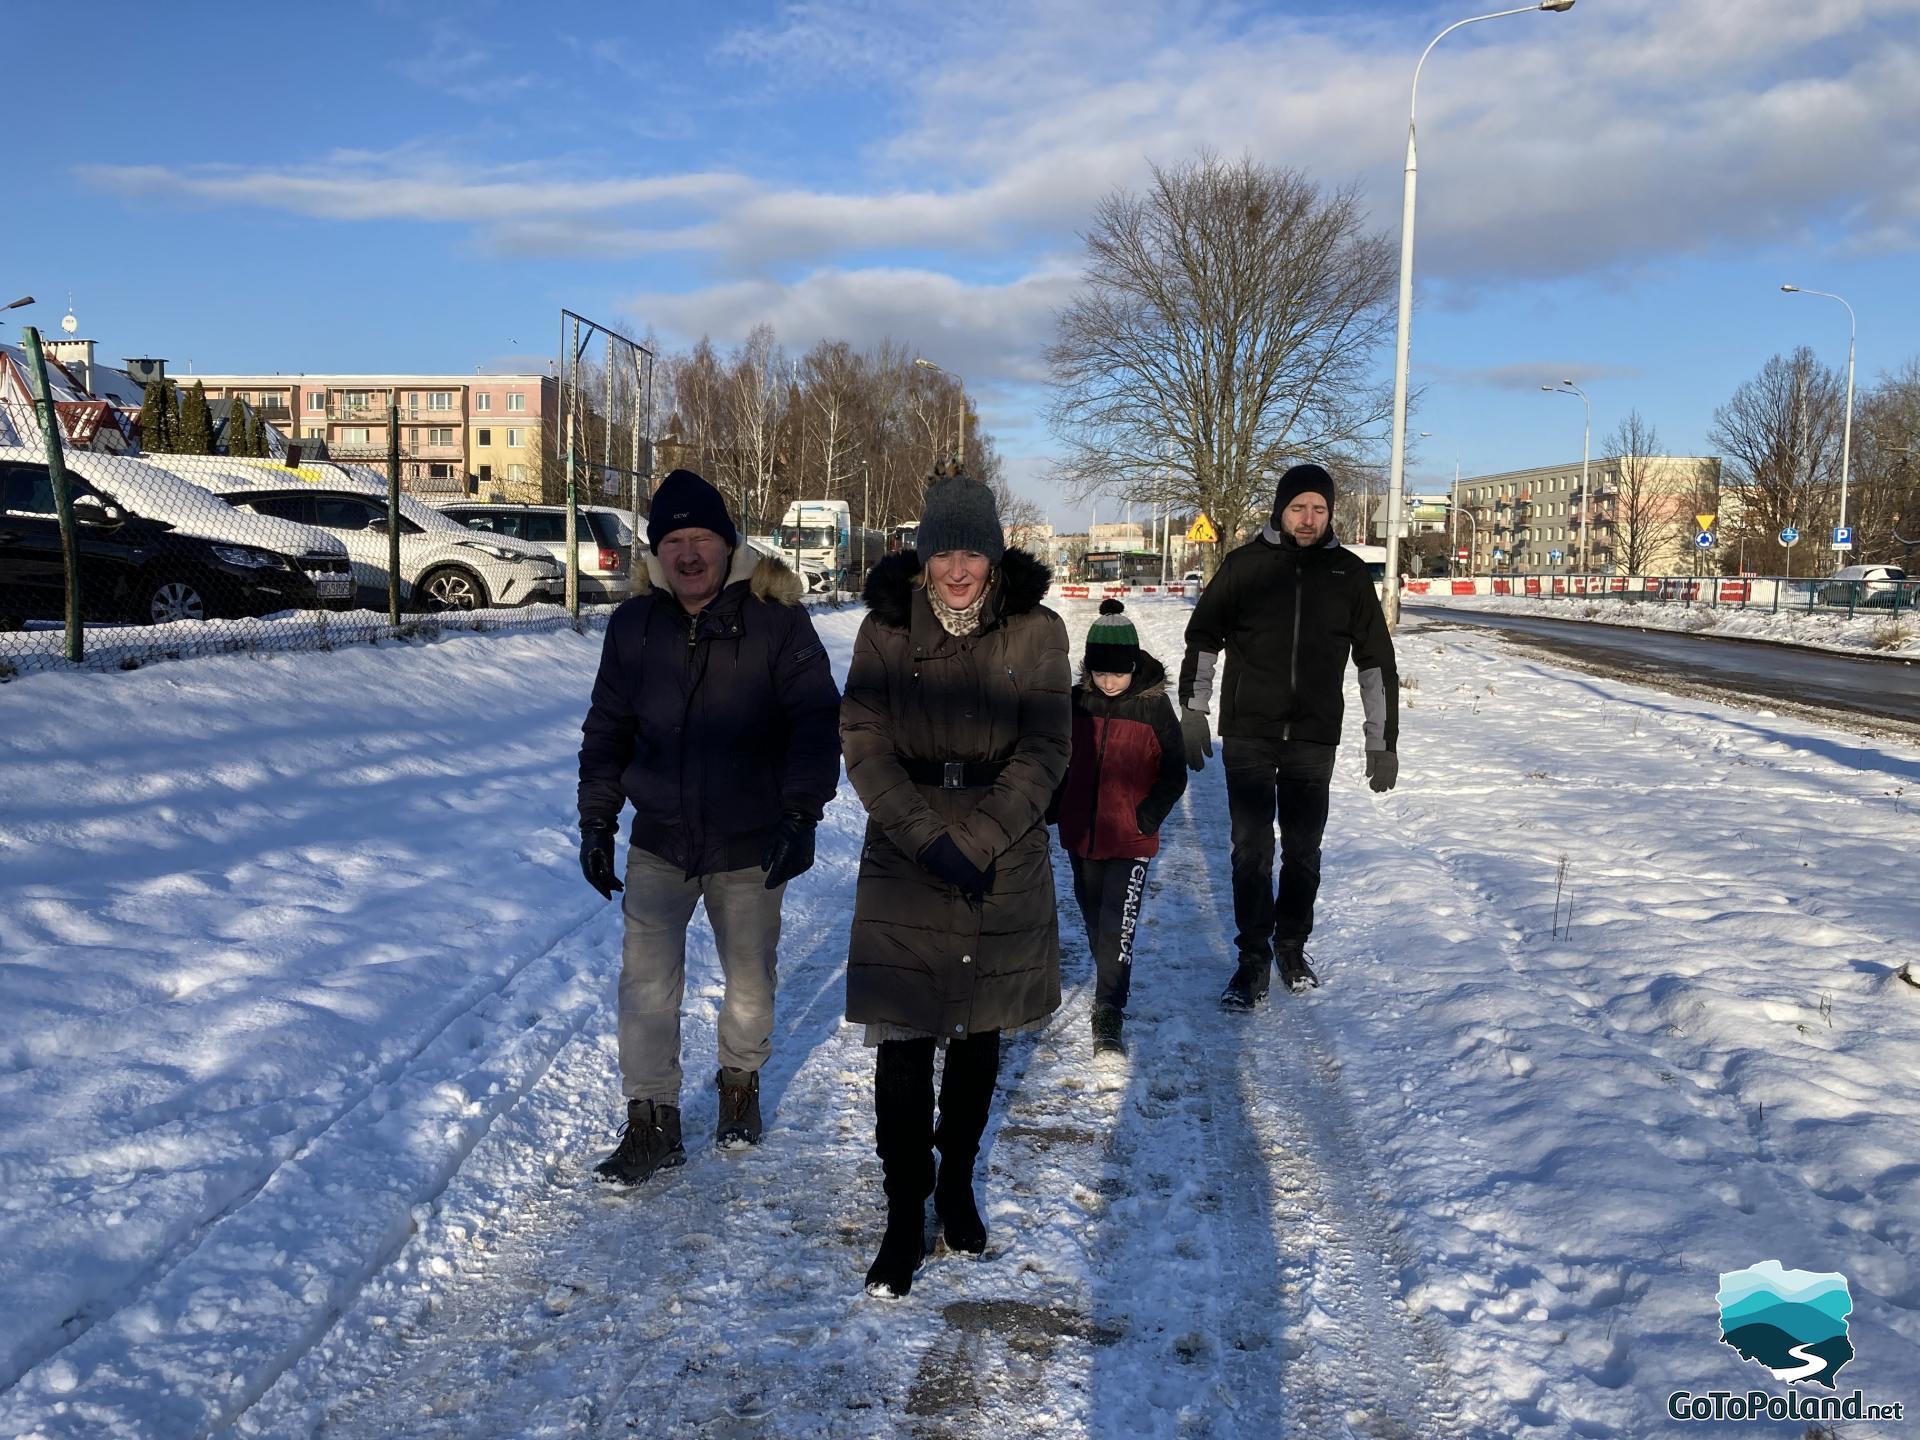 A woman, two men and a child walking along the snowy sidewalk  